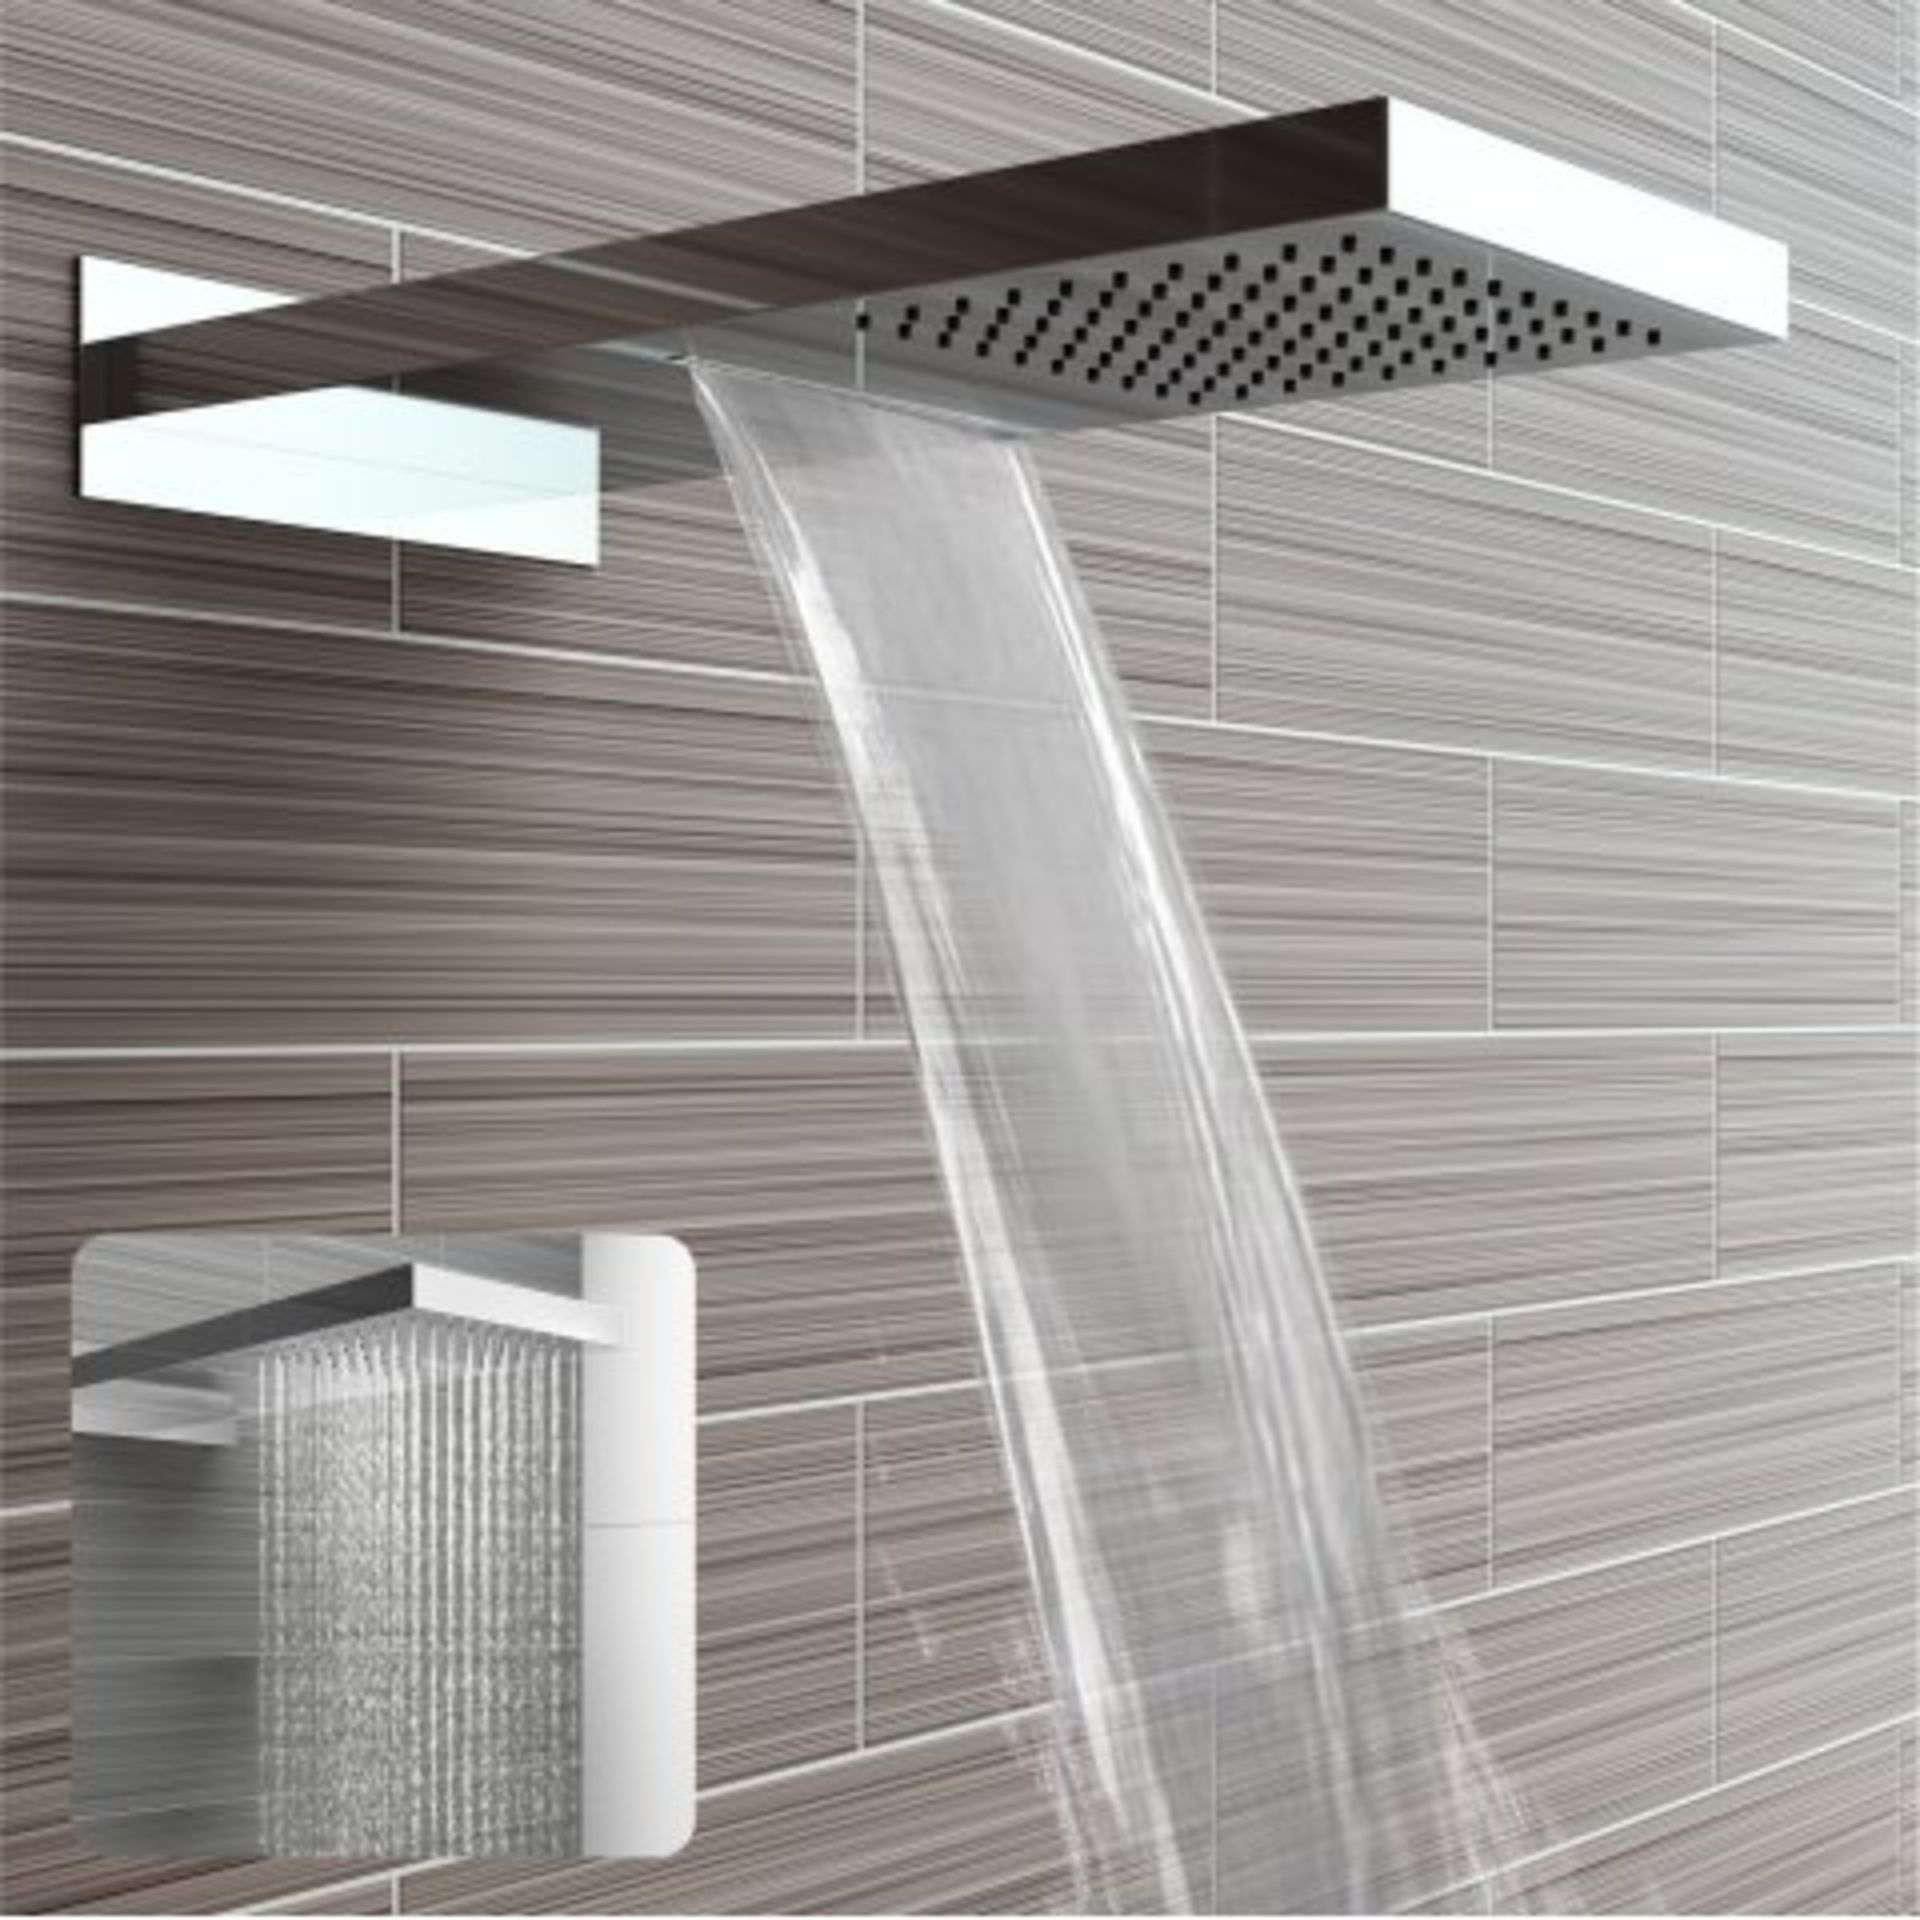 (I49) Stainless Steel 200x500mm Waterfall Shower Head RRP £374.99 "What An Experience": Enjoy - Image 2 of 5